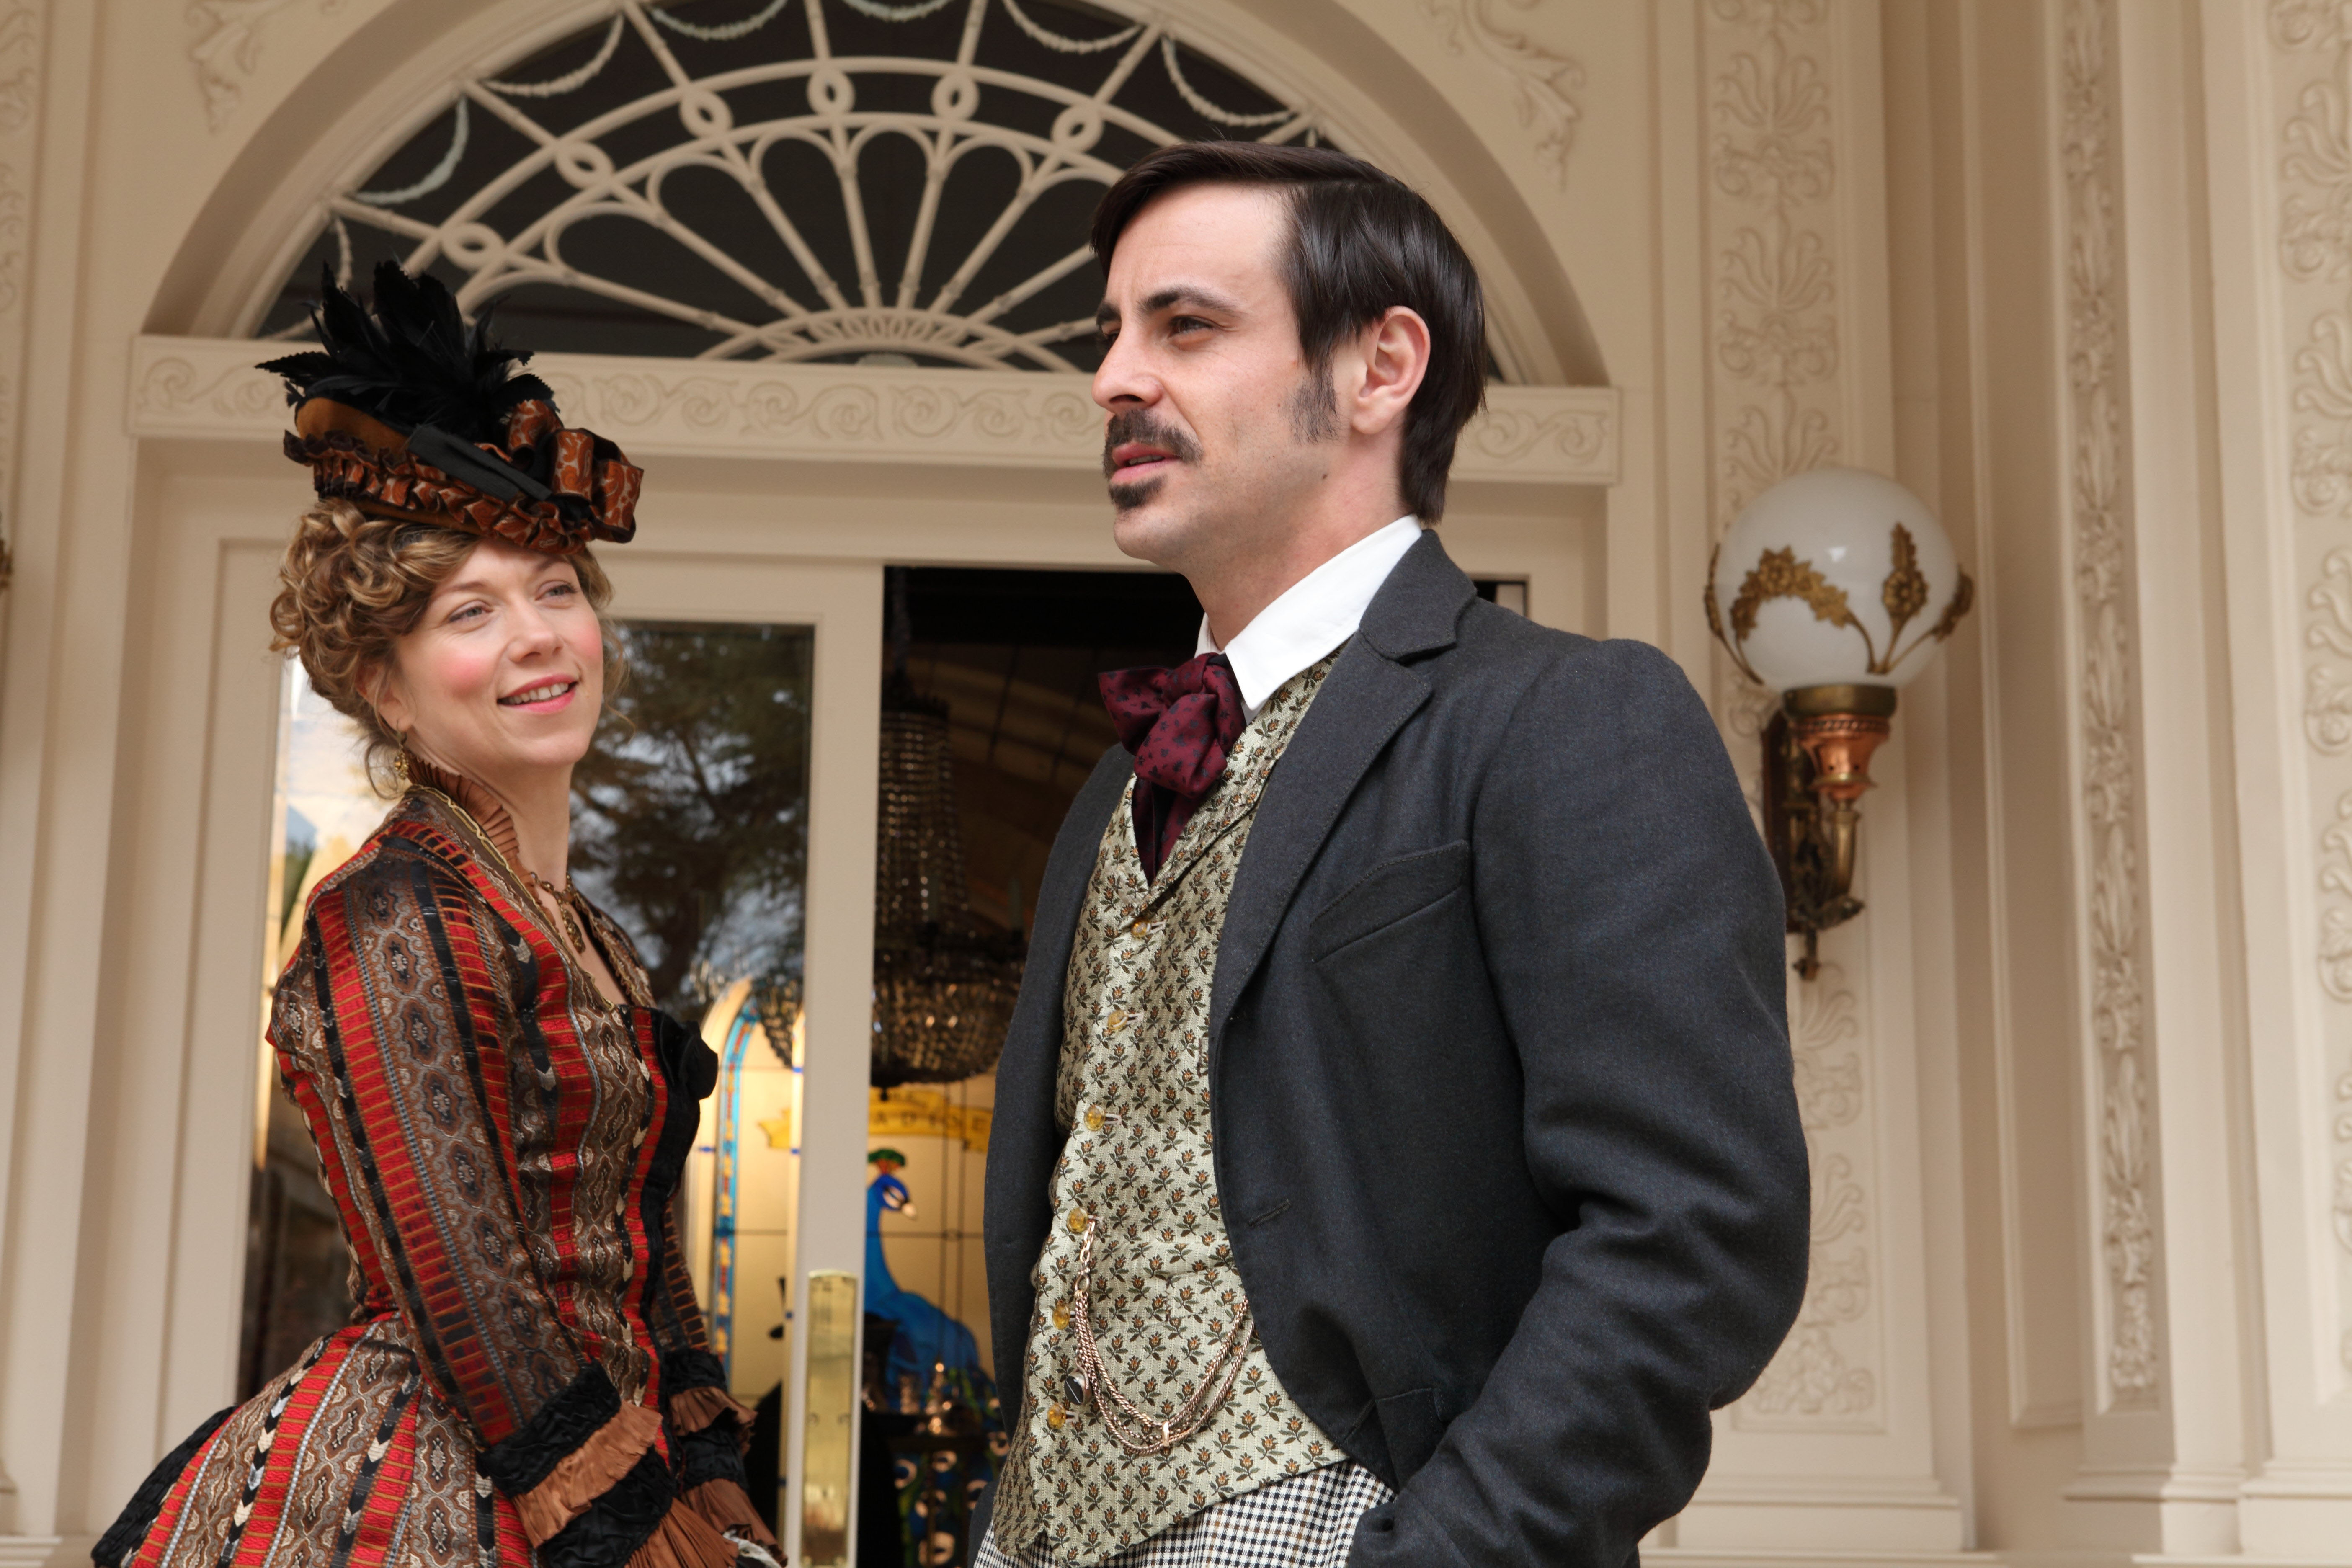 Moray and his annoying French lady friend Clemence. (Photo: Courtesy of (C) Laurie Sparham/BBC 2013 for MASTERPIECE)